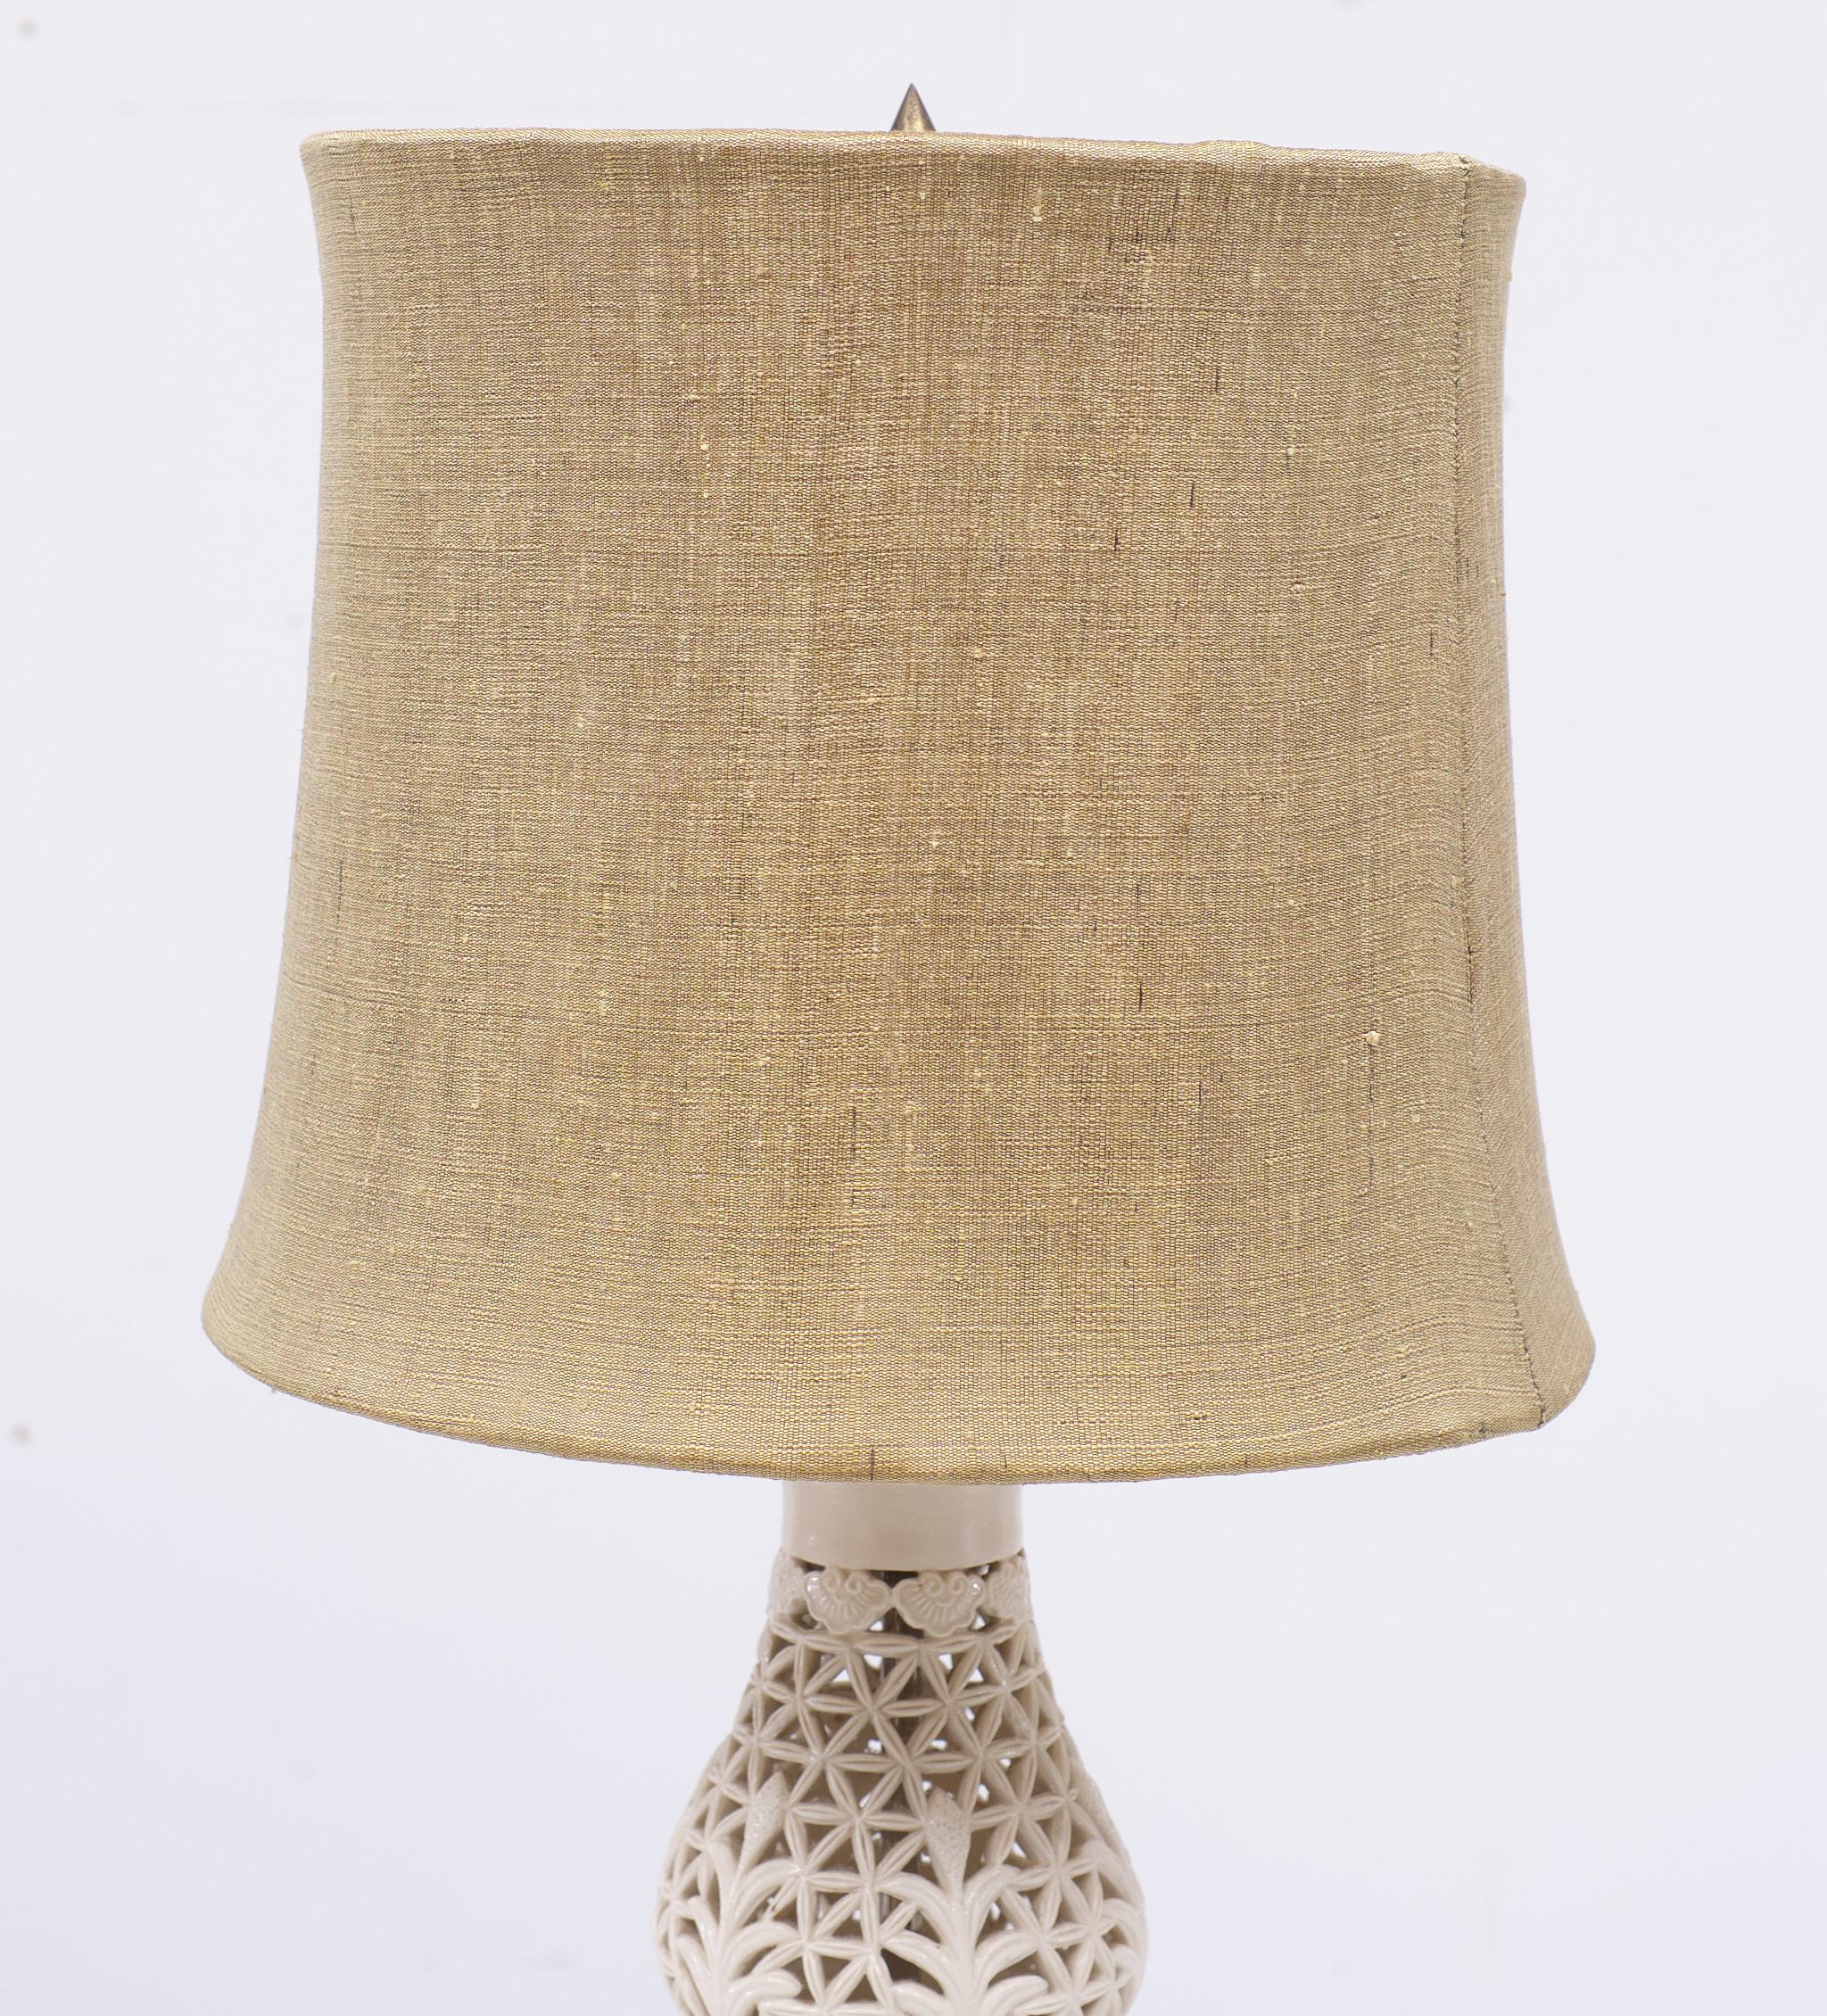 Ceramic Reticulated Chinoiserie Blanc De Chine Table Lamp  1960s 